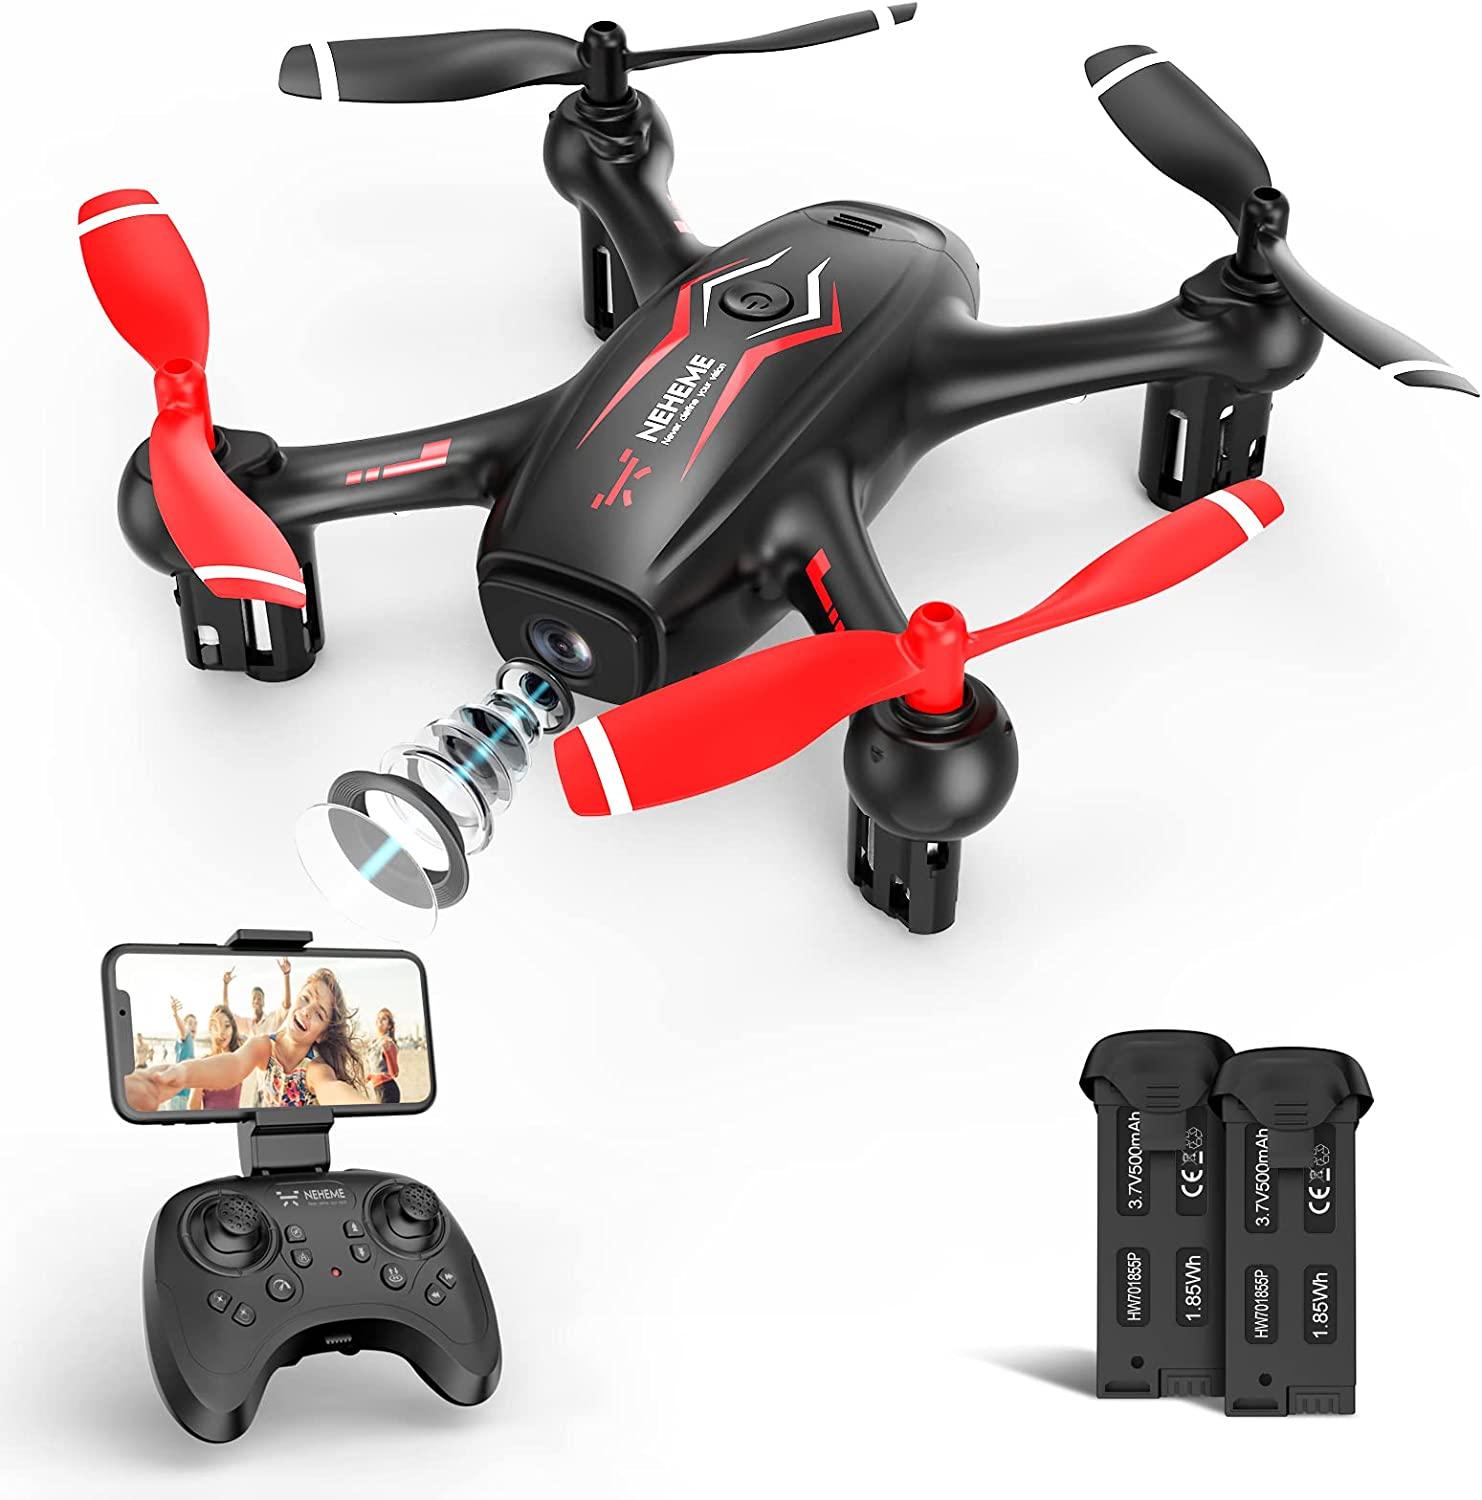 NEHEME NH530 Drones - With Camera for Adults Kids, FPV Drone with 1080P HD Camera , RC Quadcopter for Beginners with Gravity Sensor, Headless Mode, One Key Return/Take Off/Landing, Drone with 2 Batteries - RCDrone